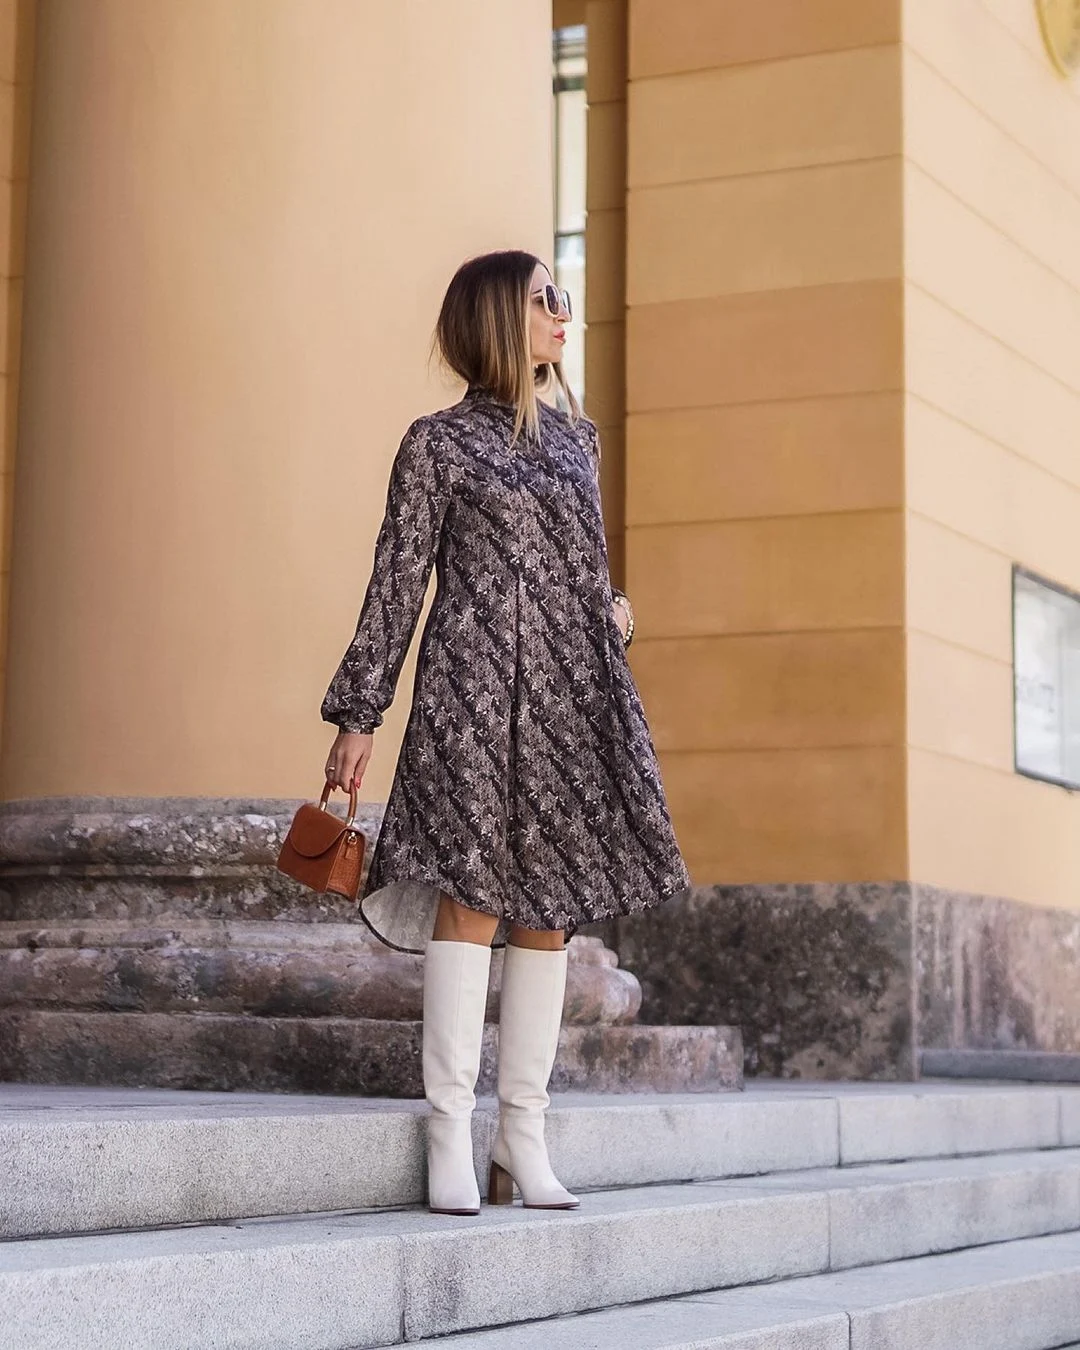 How to style a dress and white boots